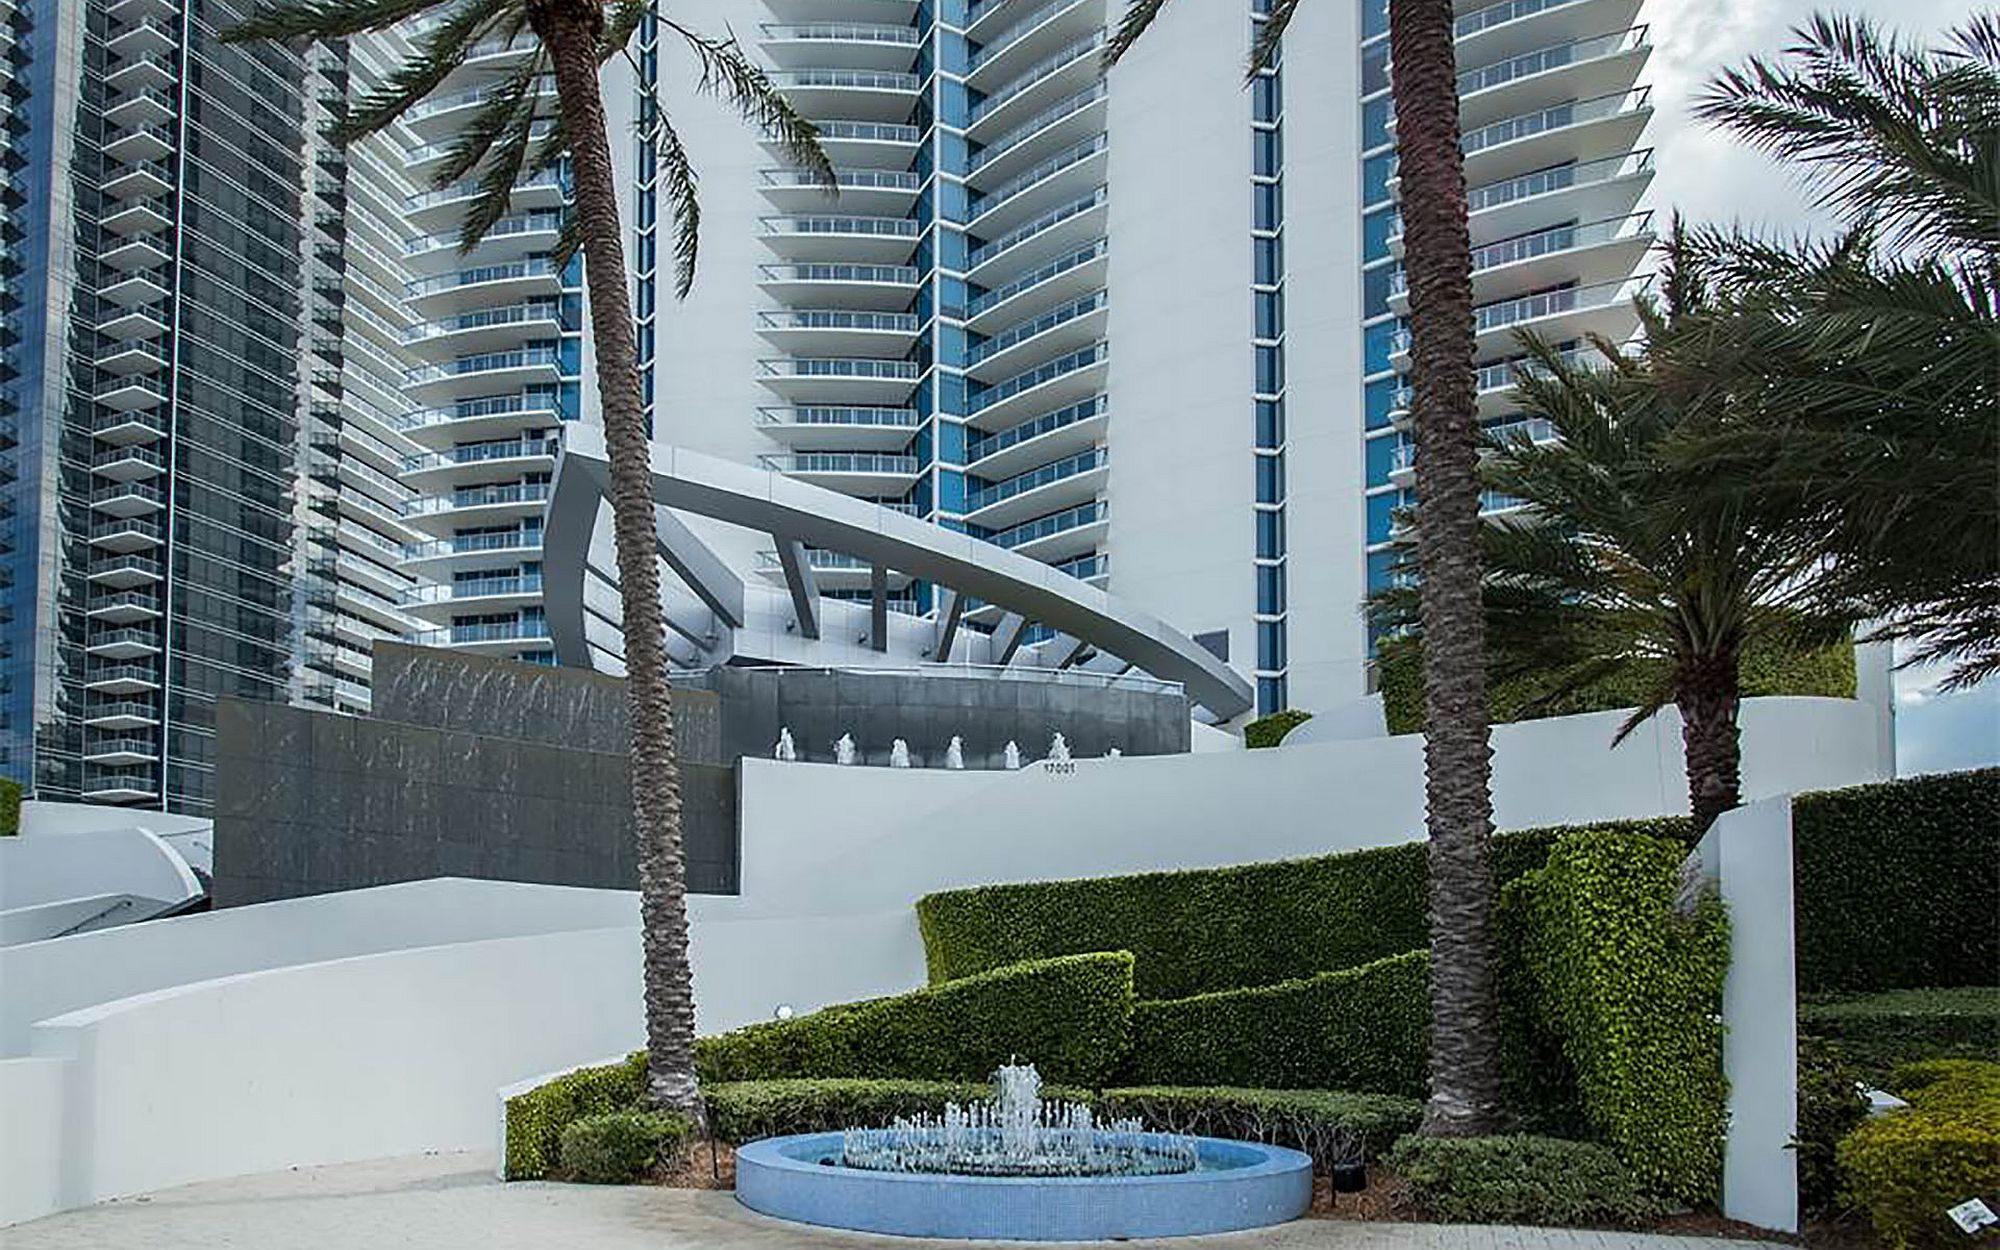 South Florida's finest luxury condos with pristine beaches and ocean view